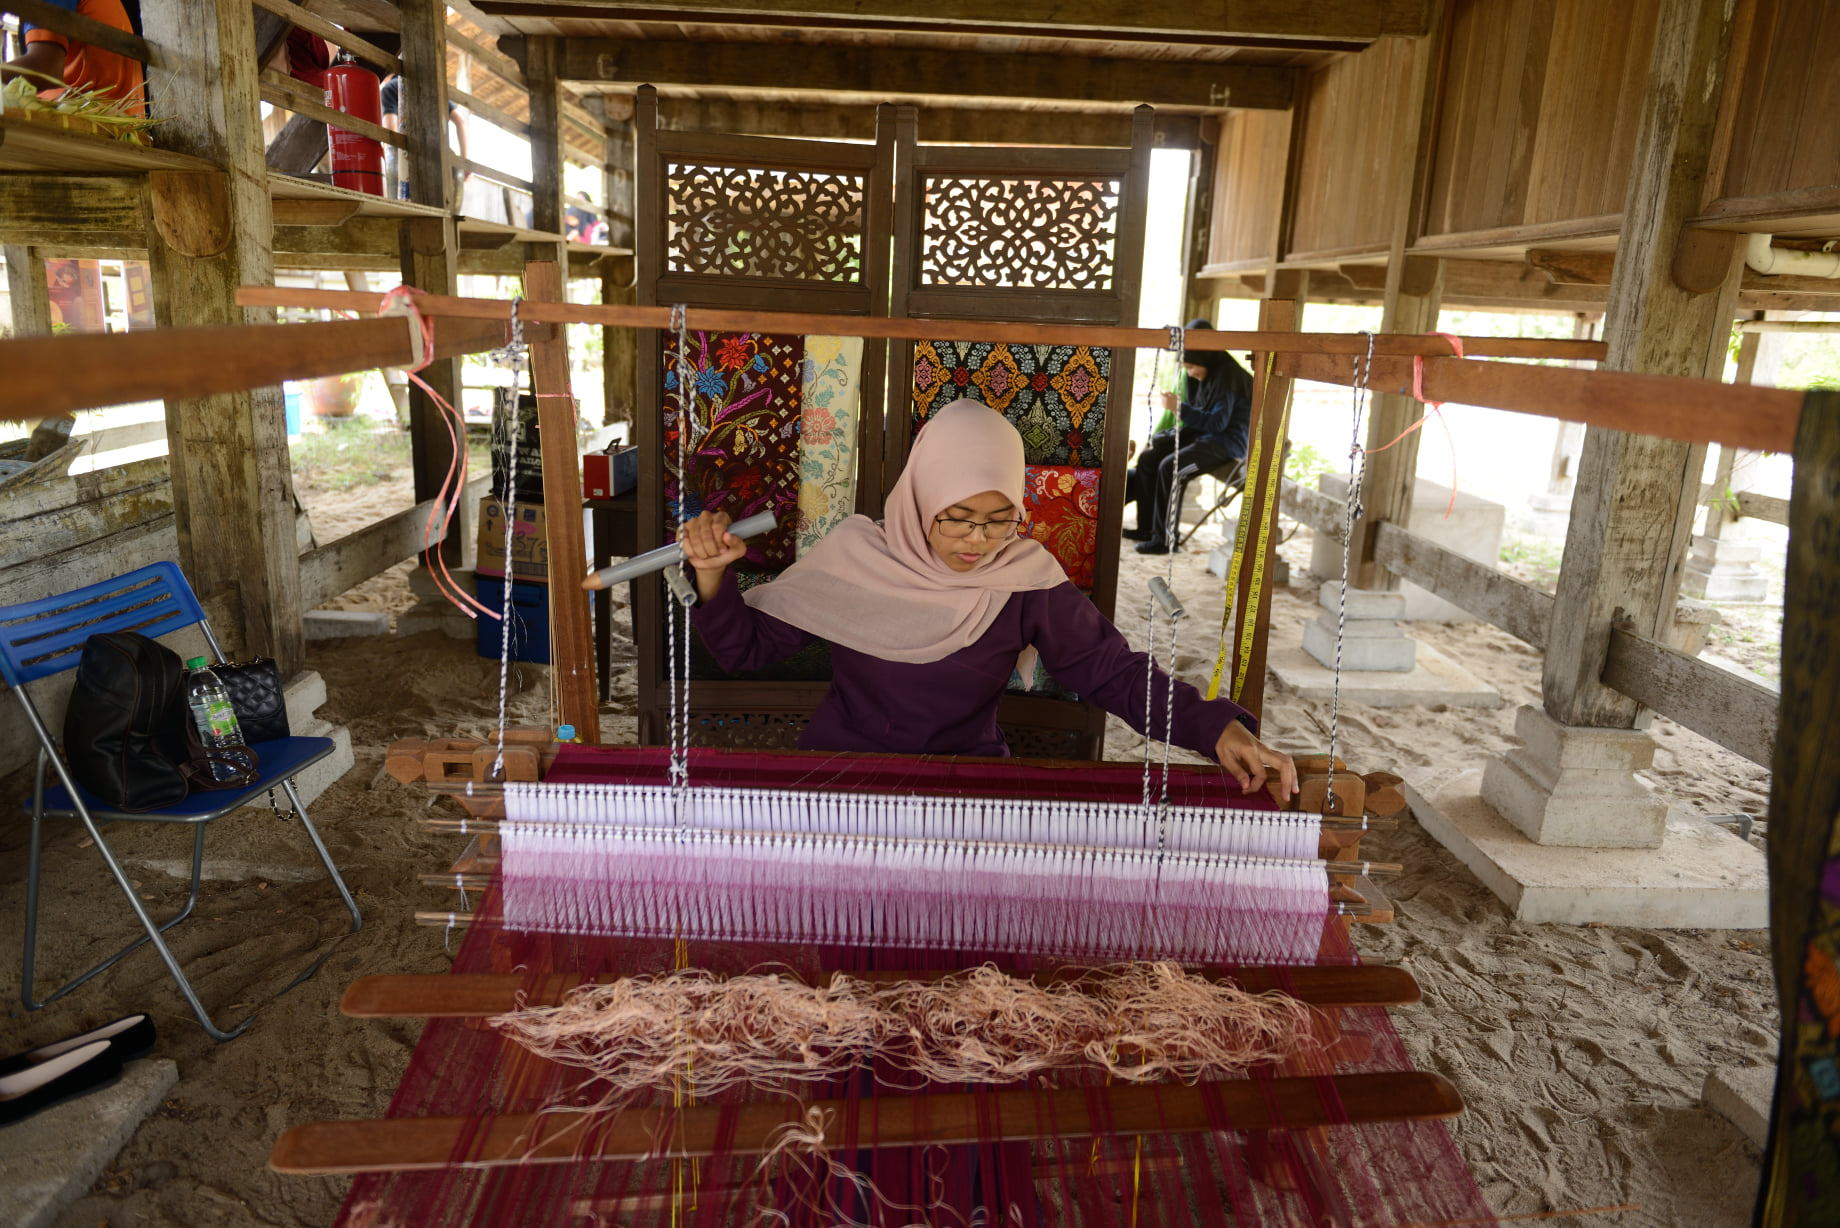 Efa, a weaver, pulls threads through a wooden loom to create textiles, a craft that Terrapuri showcases and supports by offering them for sale on its online store, Terradala. Photo courtesy of Terrapuri Heritage Village